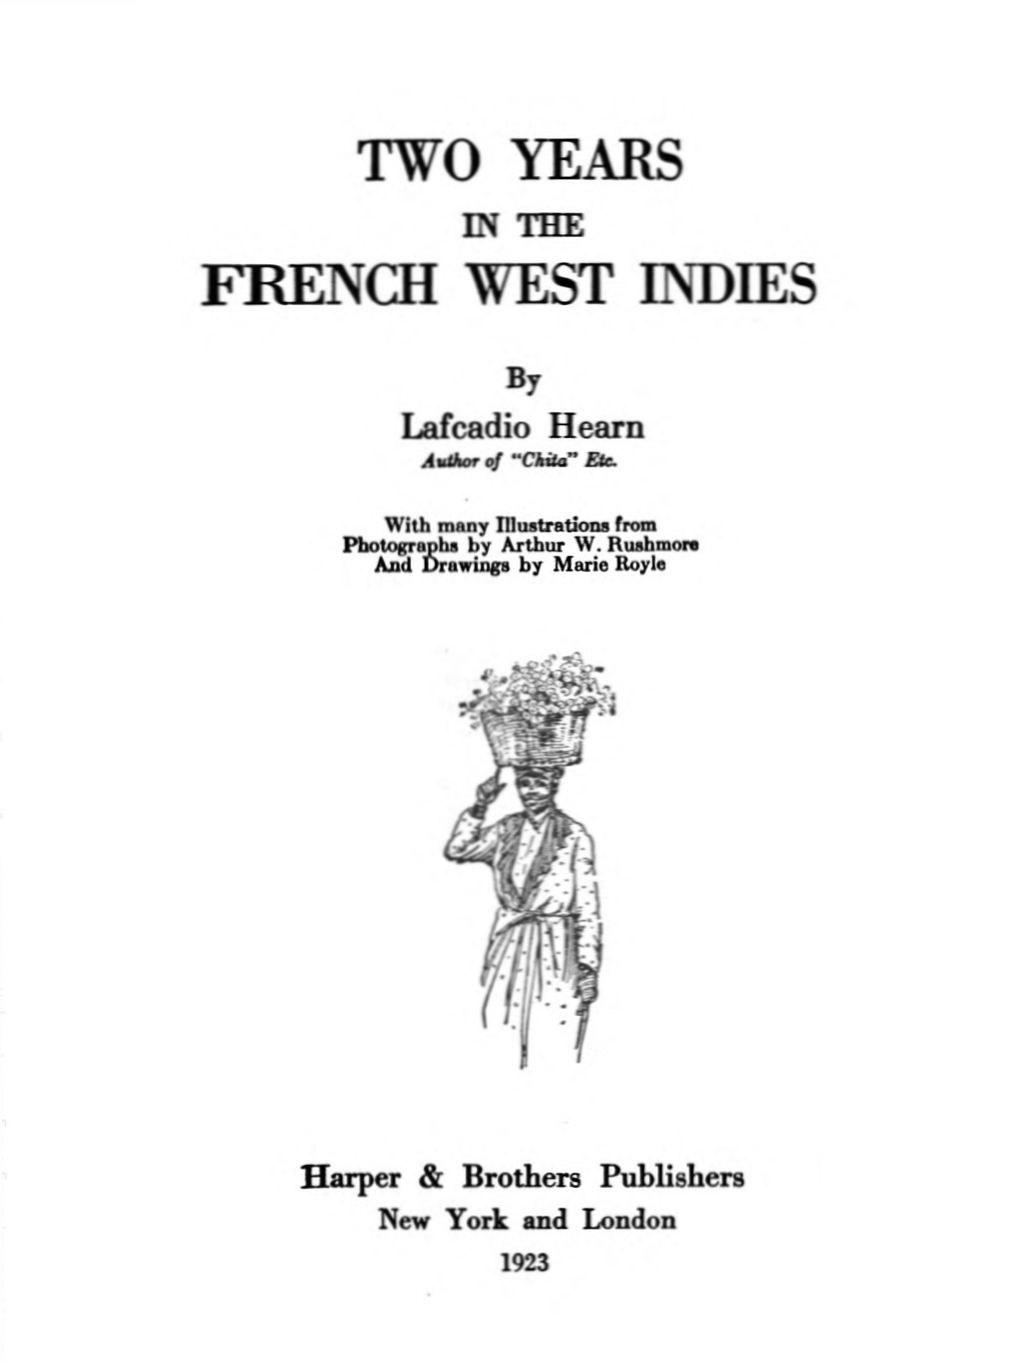 The Project Gutenberg eBook of Two Years in the French West Indies, by Lafcadio Hearn. pic